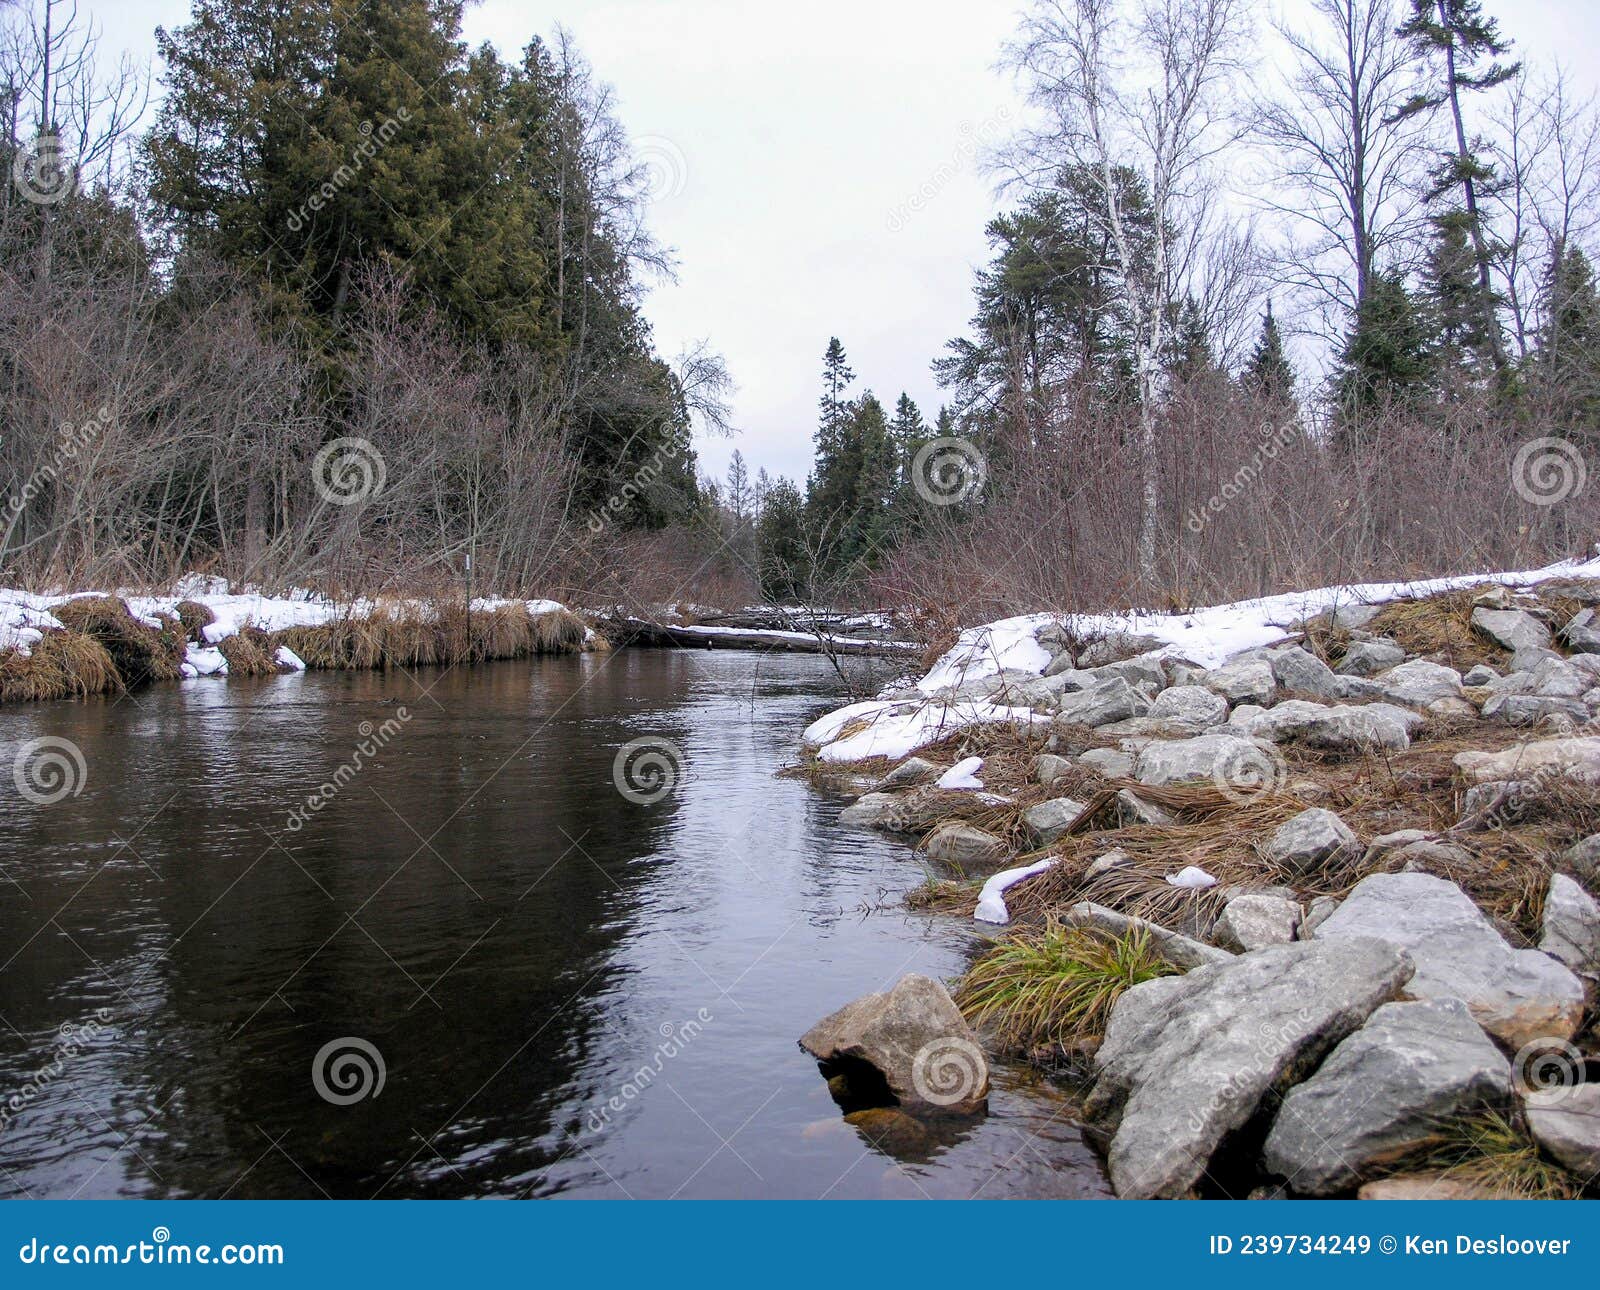 beautiful winter landscape of the au sable river in grayling